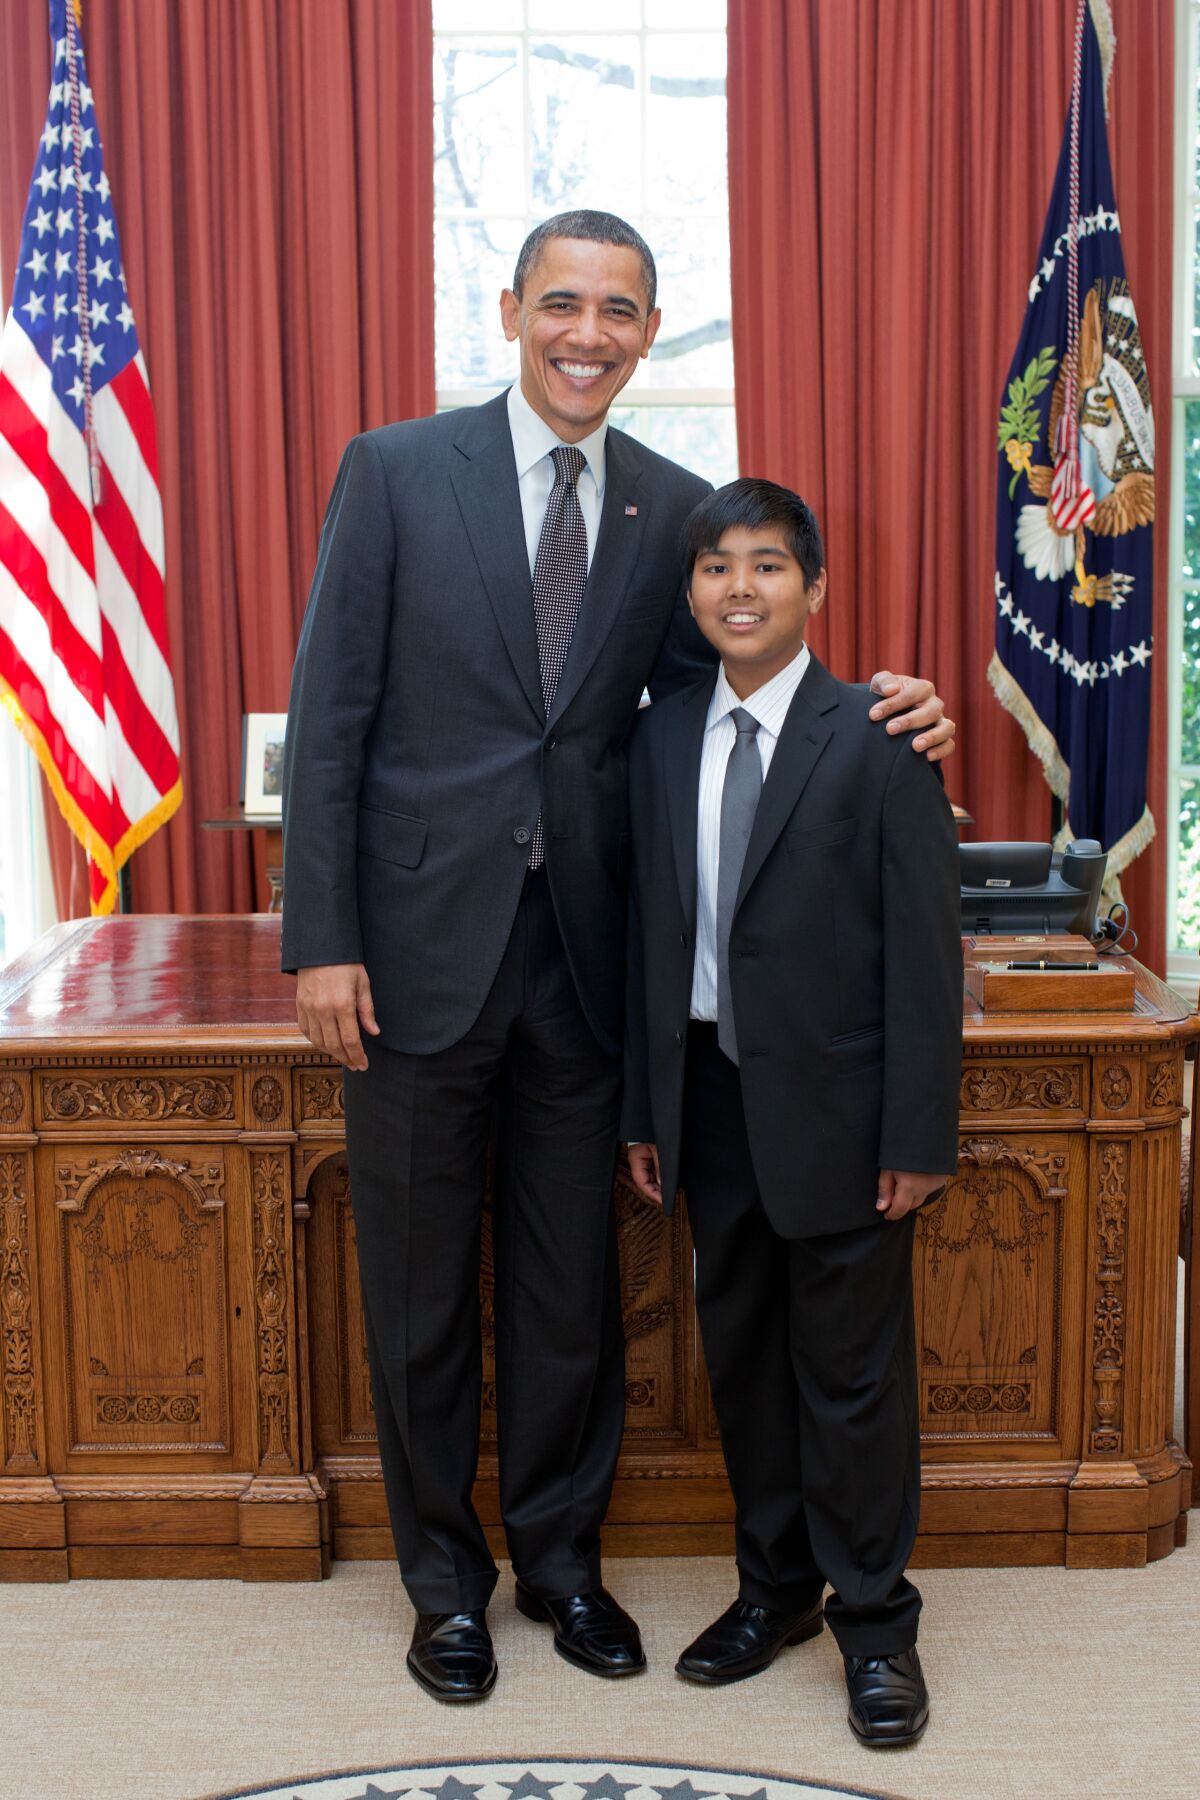 Keane and President Barack Obama in the Oval Office.